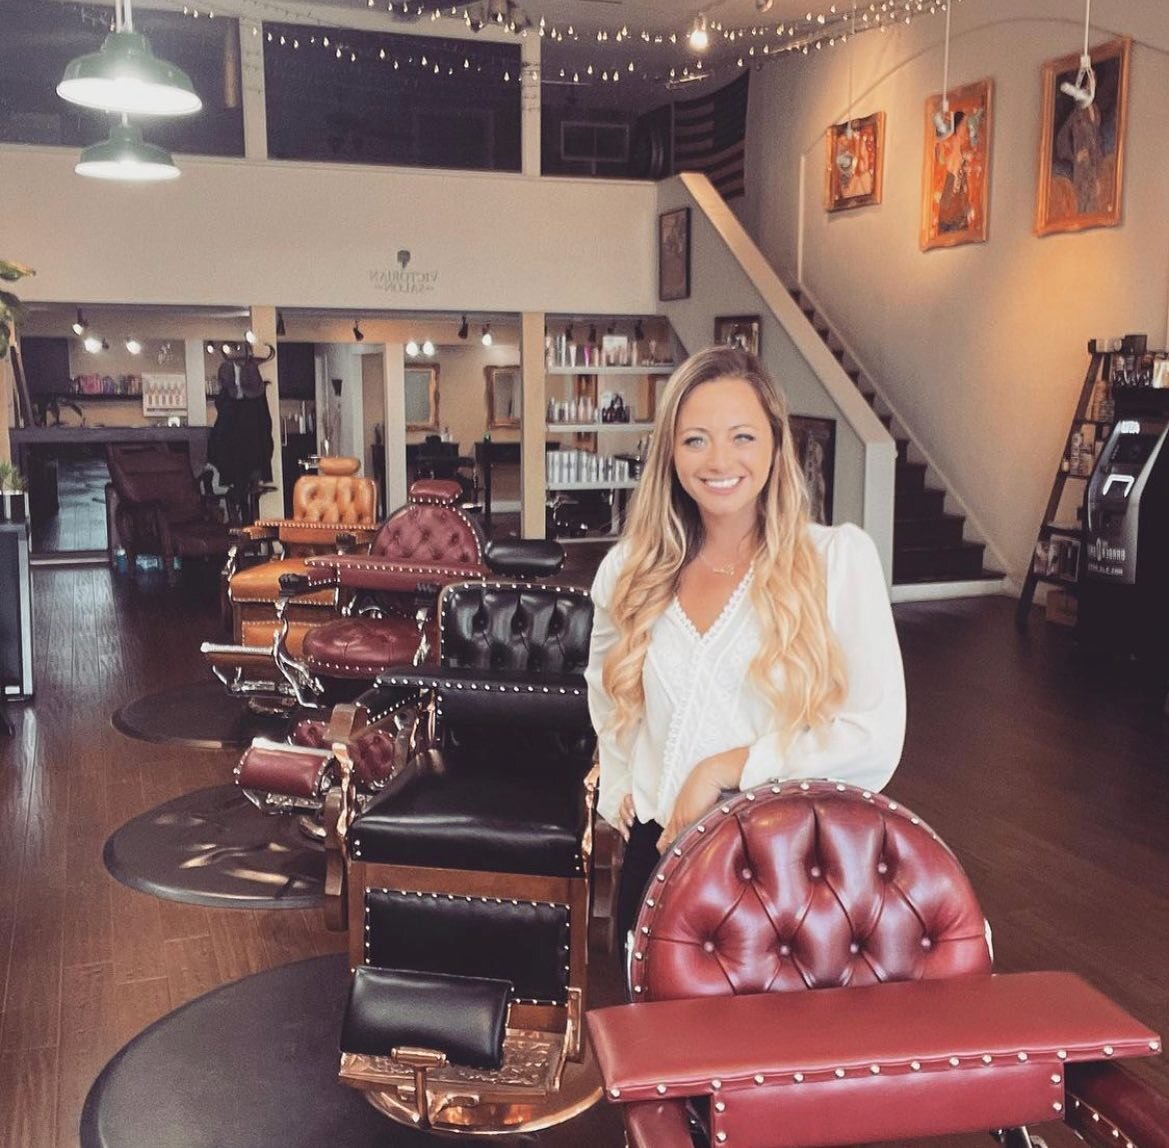 Beautiful Day Santa Barbara☀️
Meet Nancy, she is her for your hair services. Specializing in gentlemen &amp; women&rsquo;s cuts of all ages to color and styling services, she&rsquo;s here for you! 

Make sure to follow @hairbynancysb and book accordi